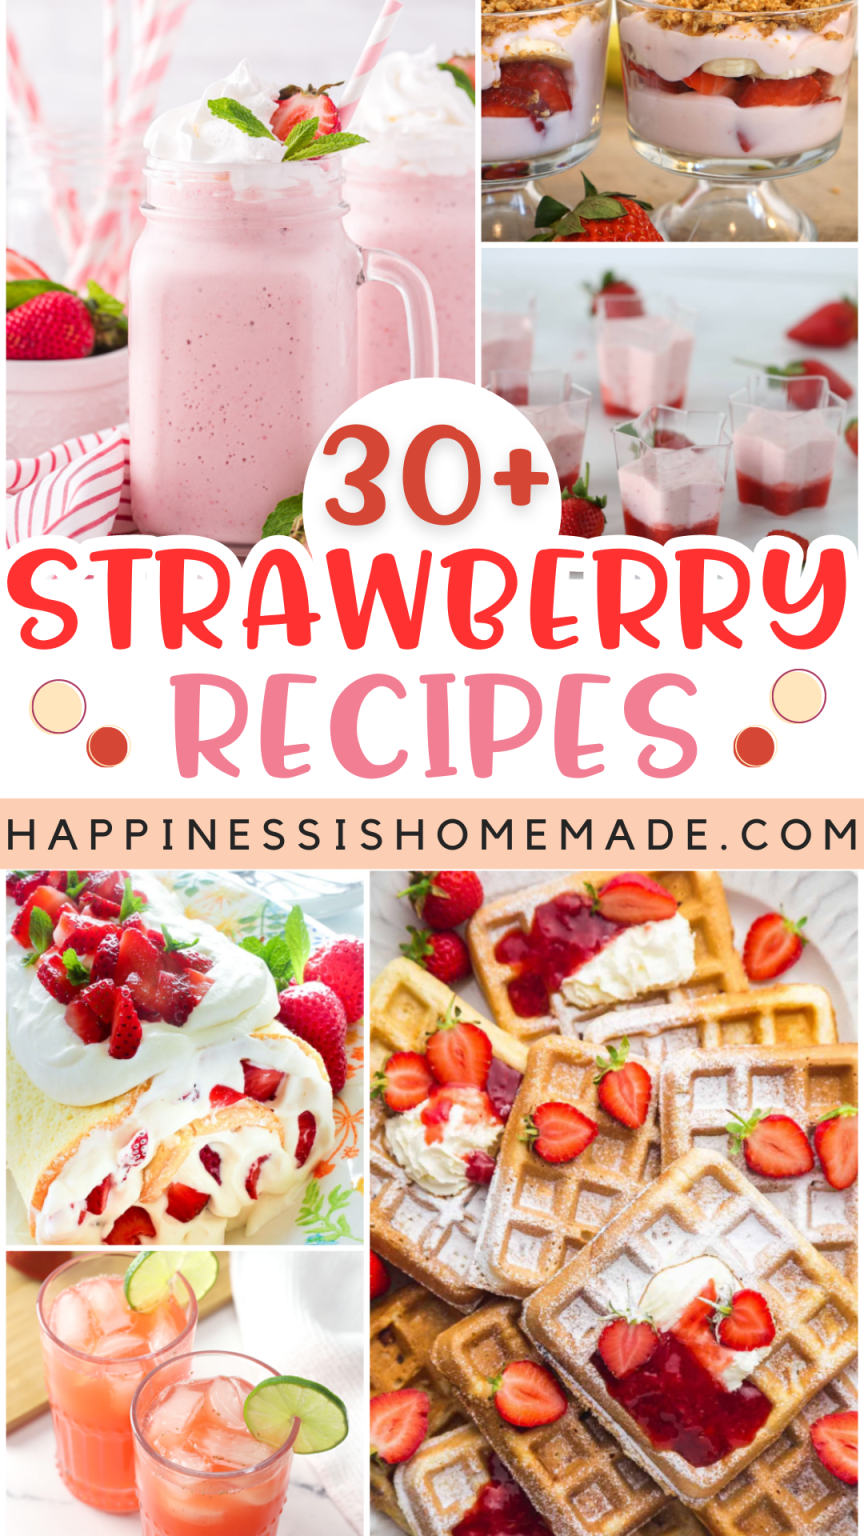 30+ Fresh Strawberry Recipes - Happiness is Homemade